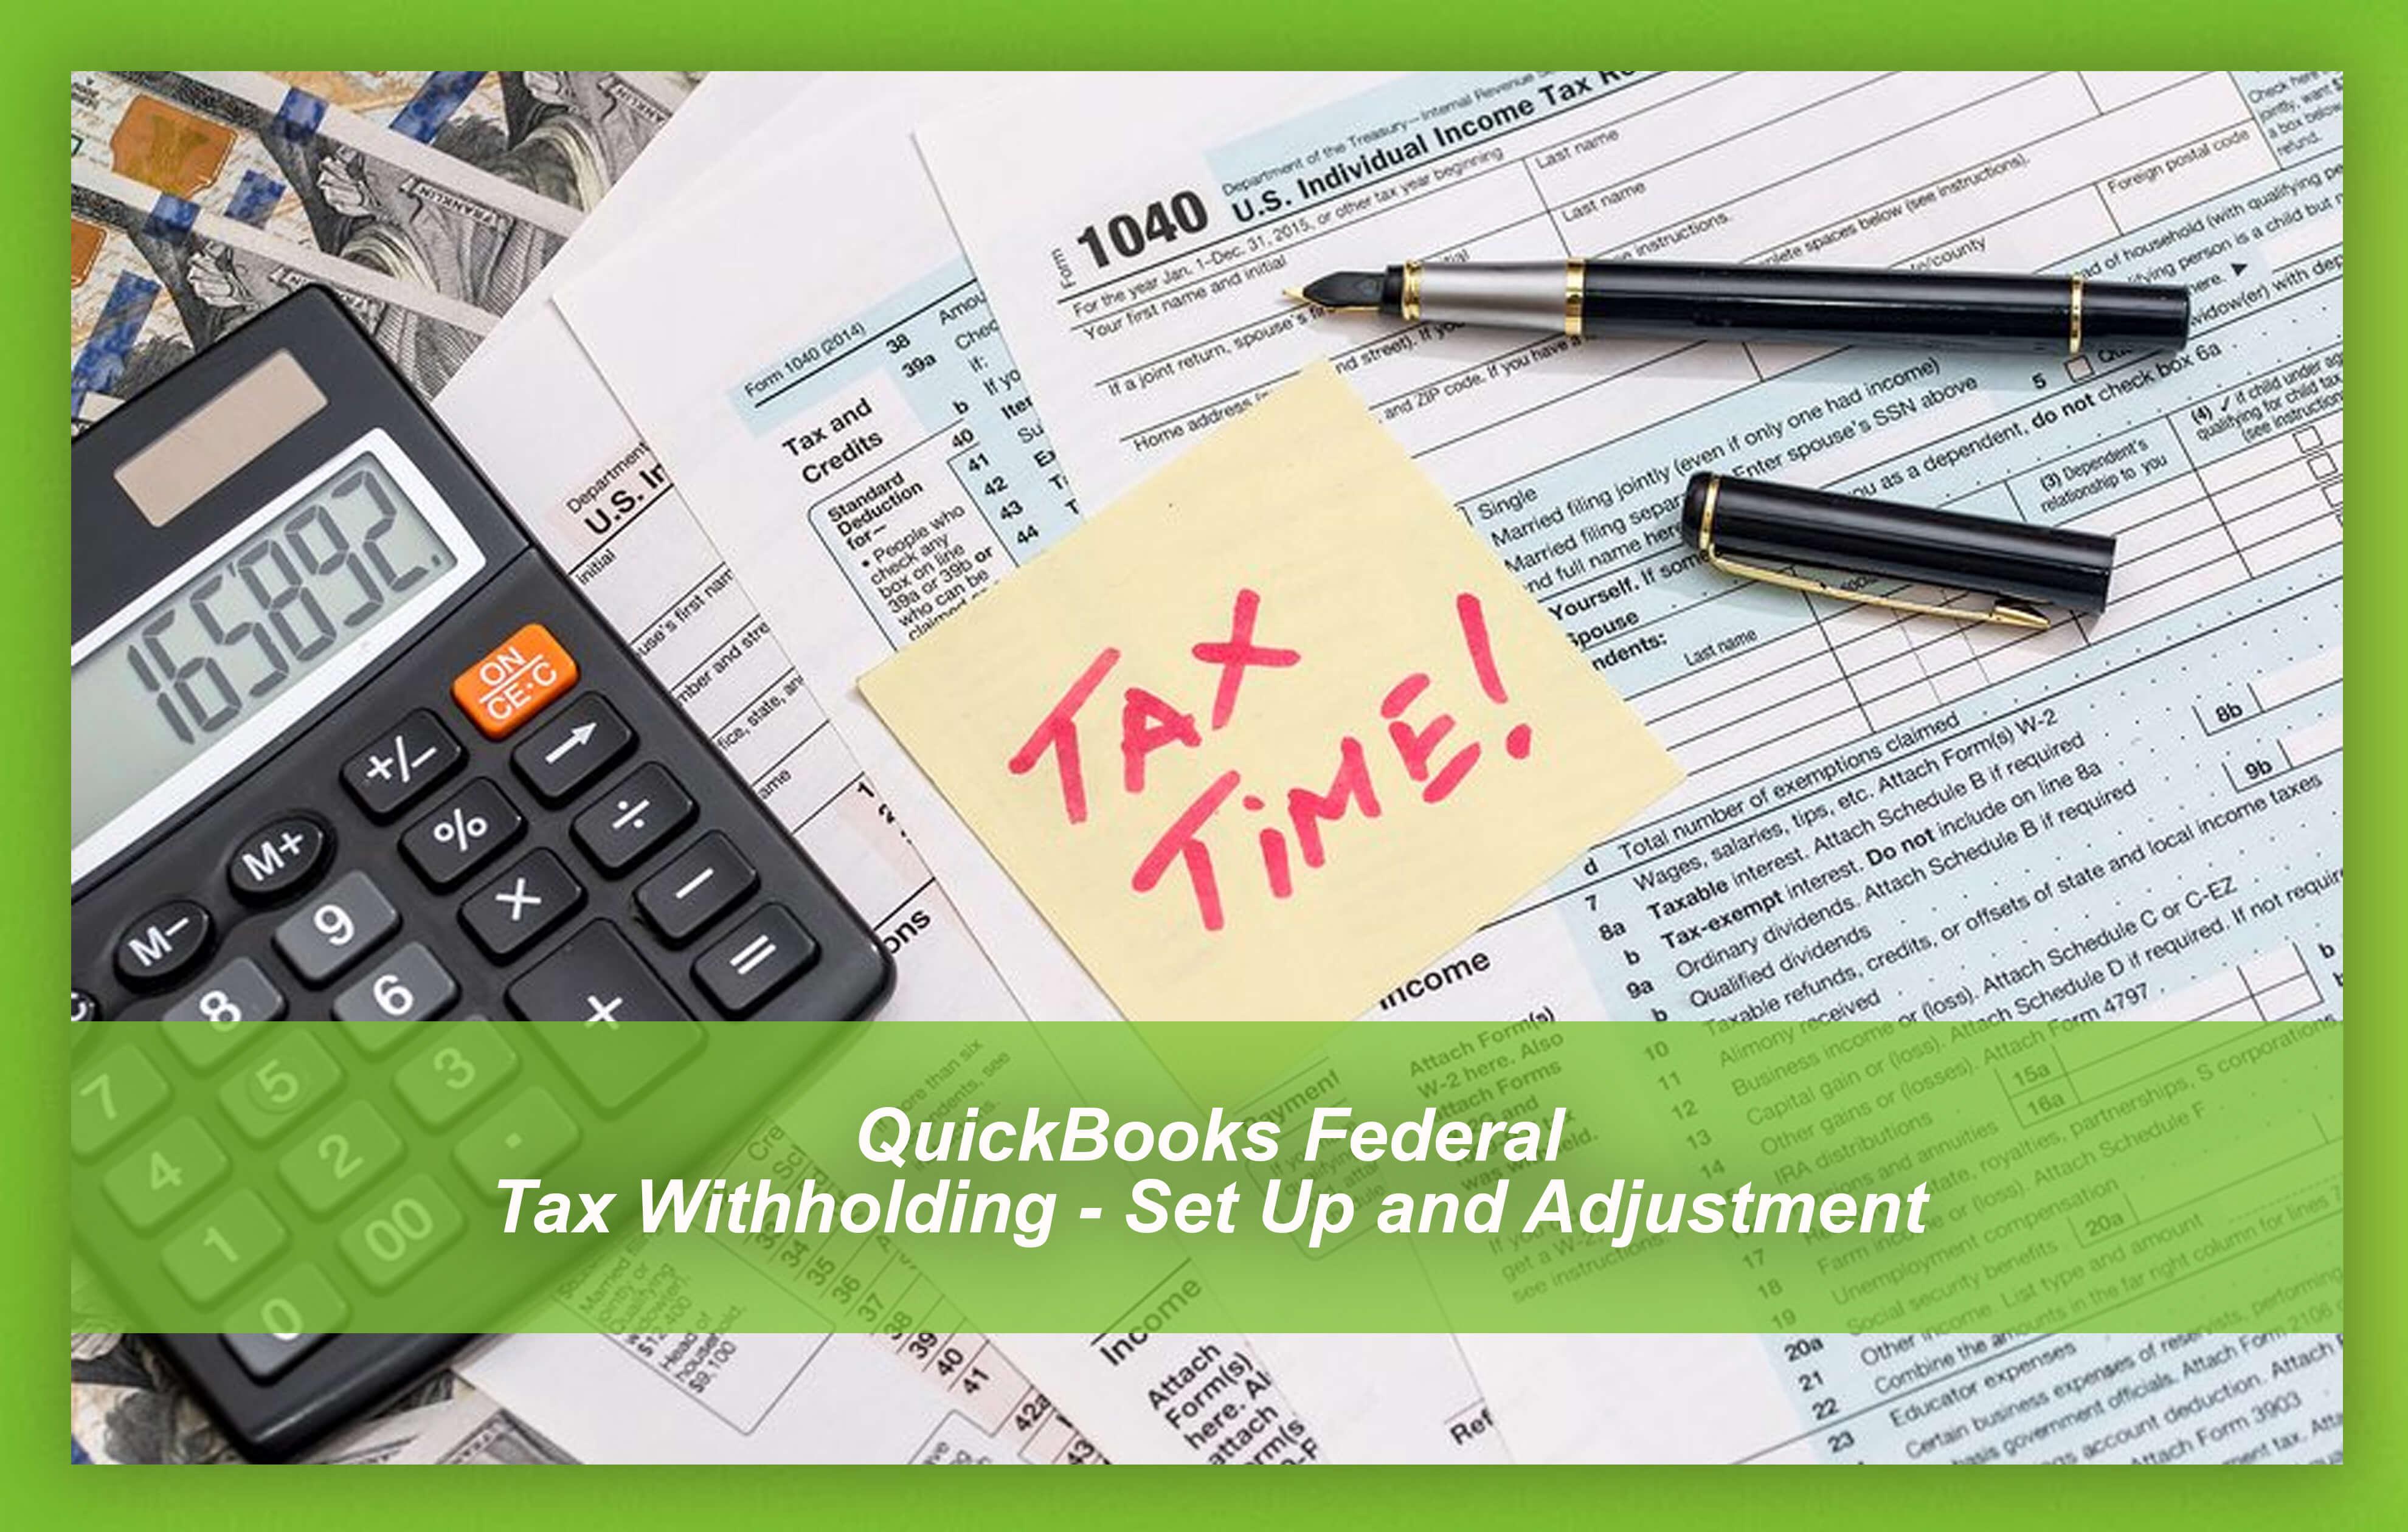 The Fundamentals of QuickBooks Federal Tax Withholding